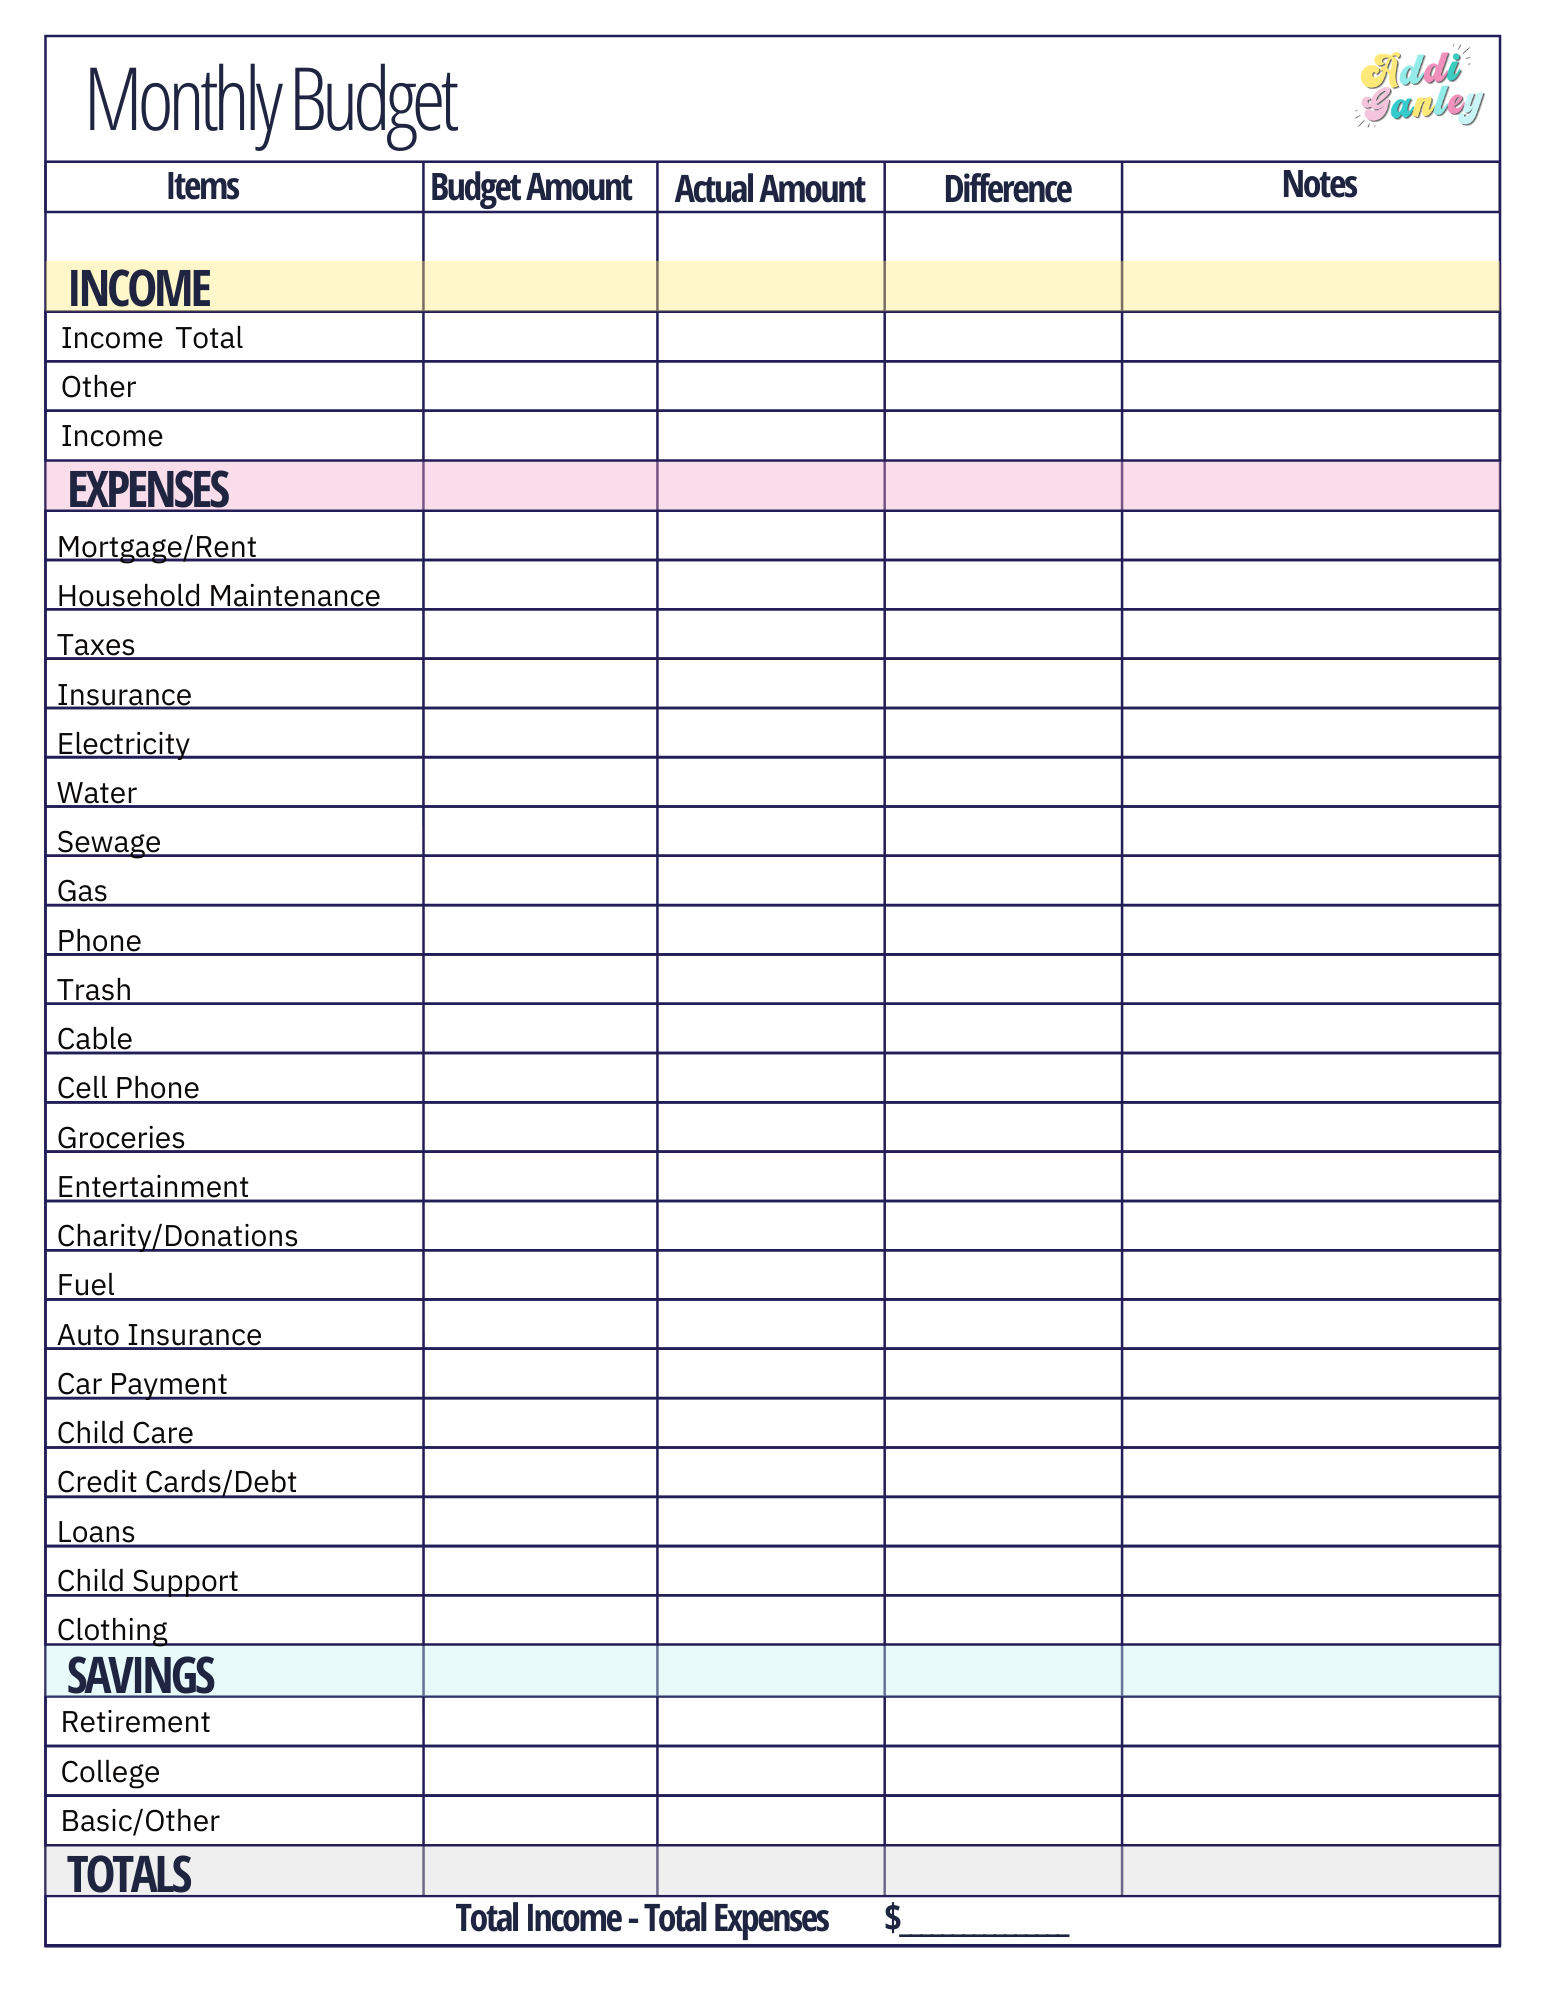 Free Monthly Budget Template - Instant Download within Free Printable Monthly Expenses Worksheet